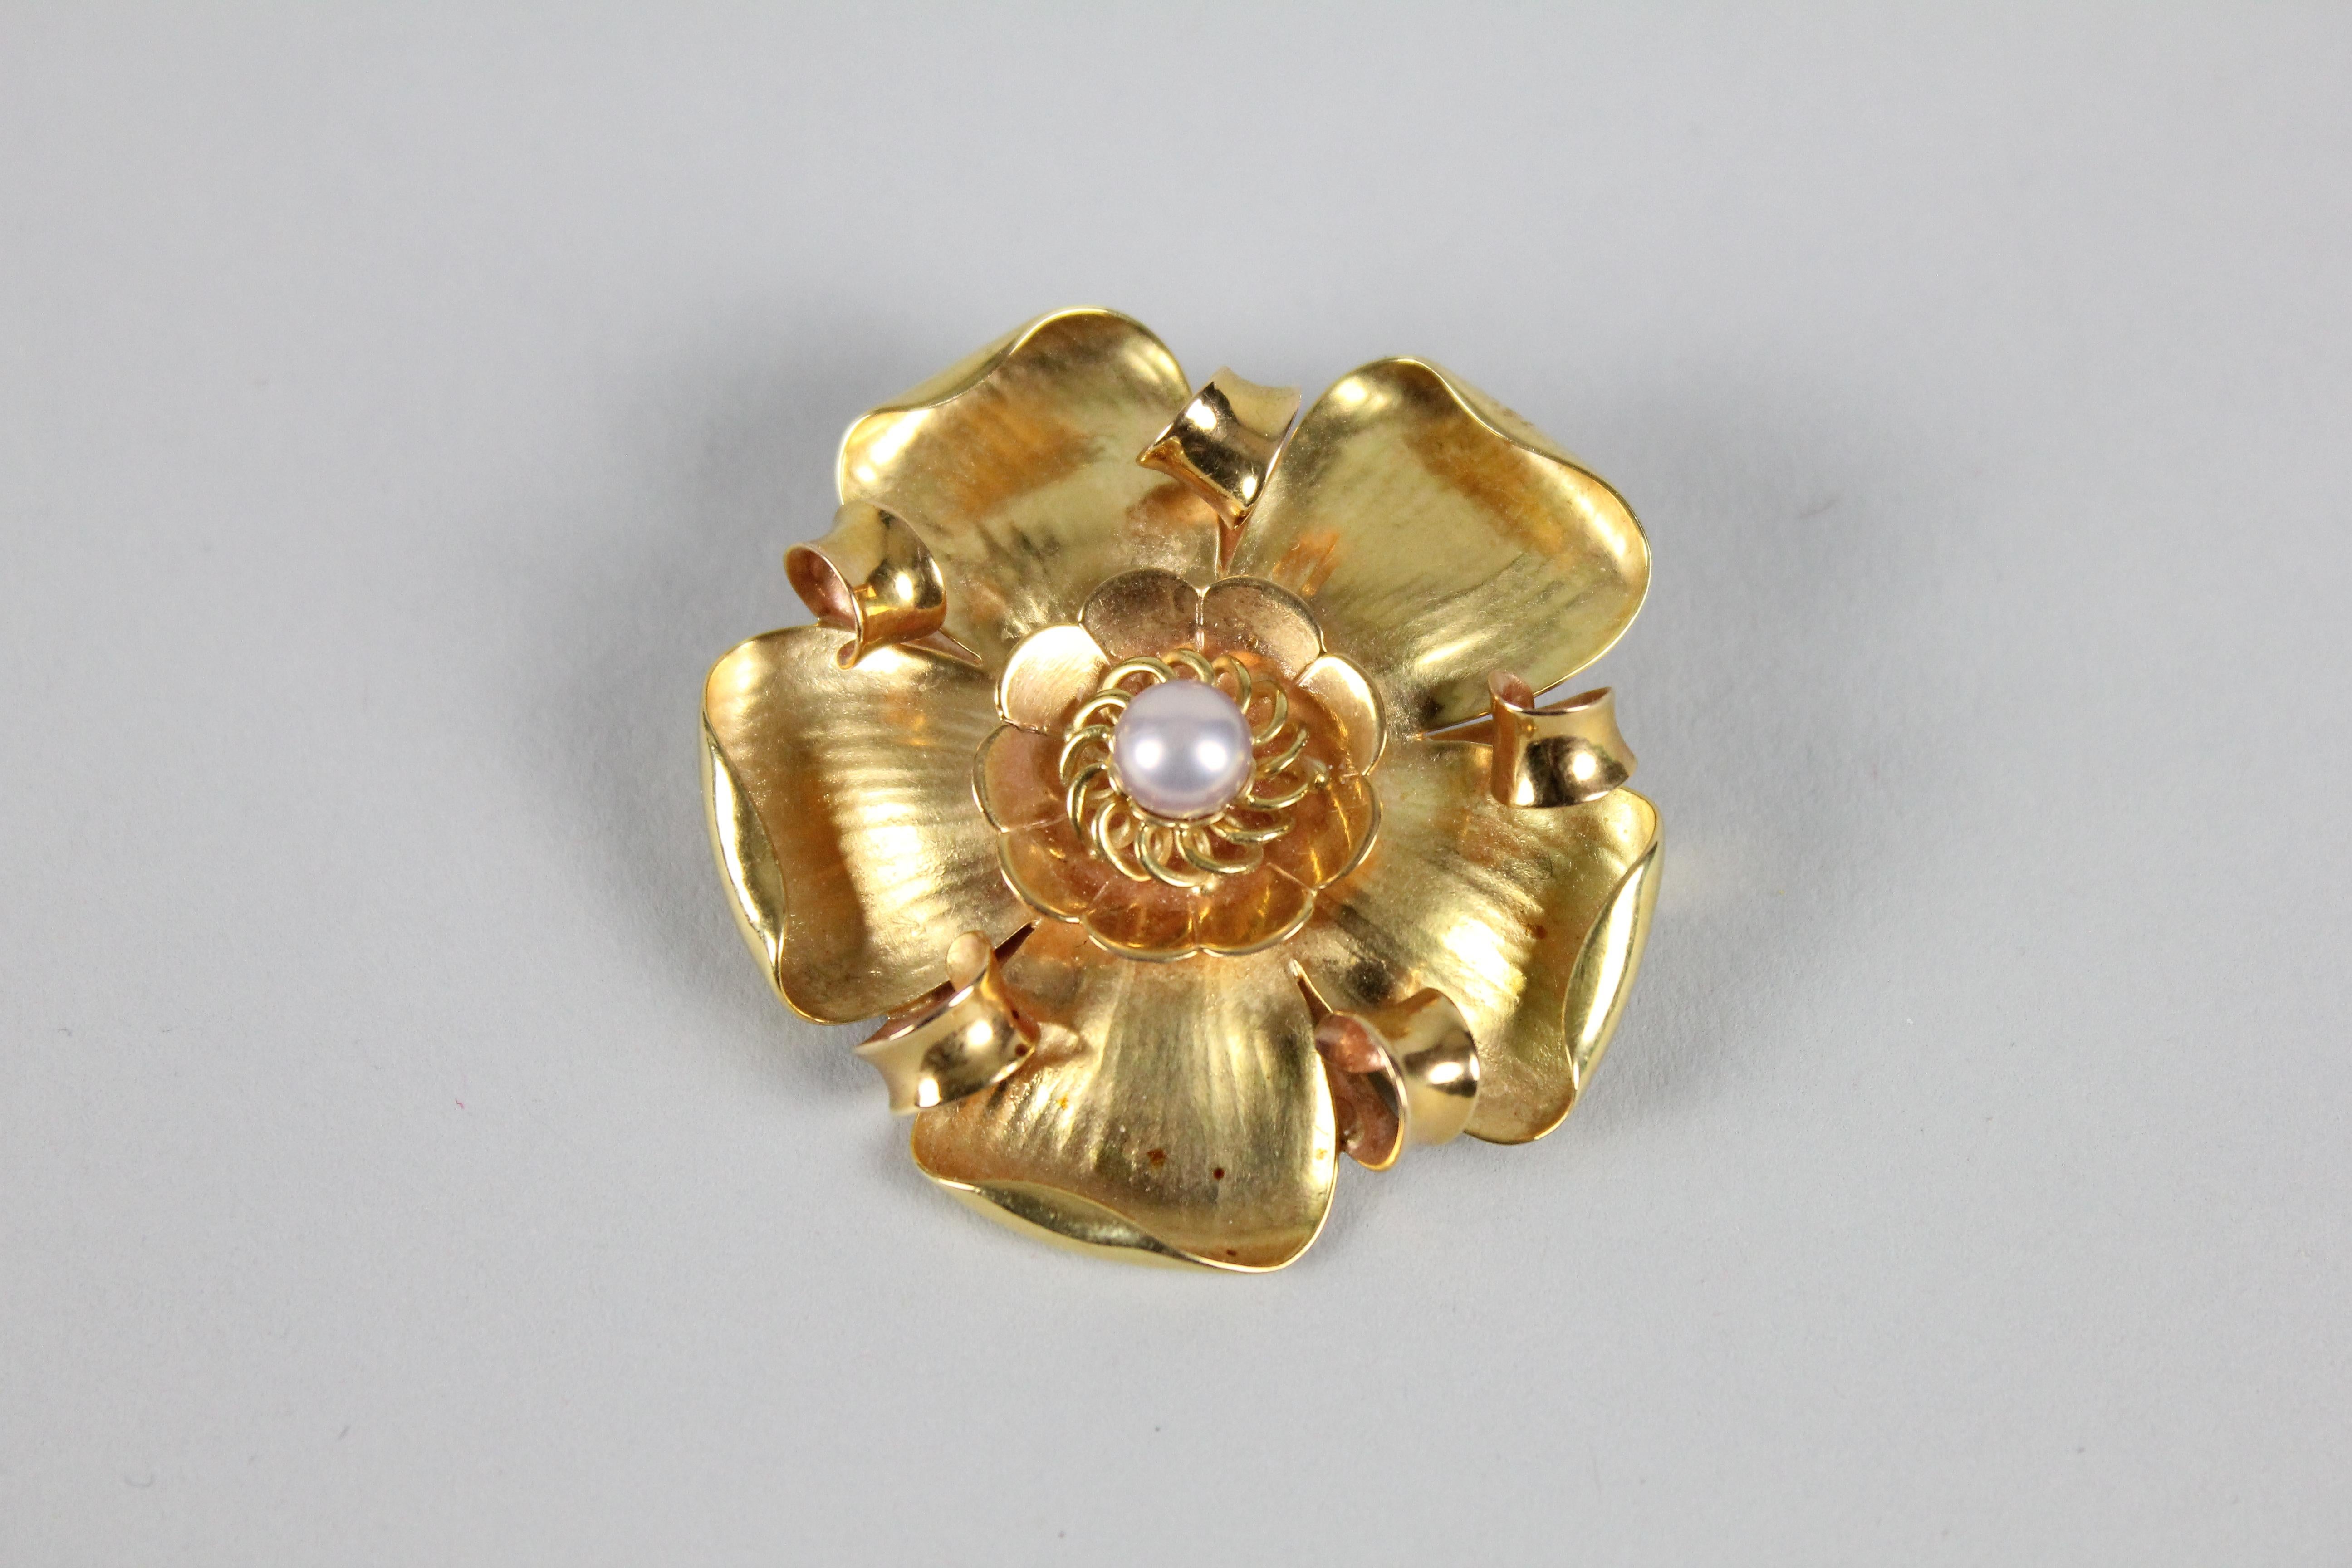 Wonderful 18k gold brooch depicting a flower.
Made by Erik Fleming (1894-1954) for Borgila.
18k gold together with one pearl.
Great condition, no issues.
Diameter 4.5cm (in 1.78)